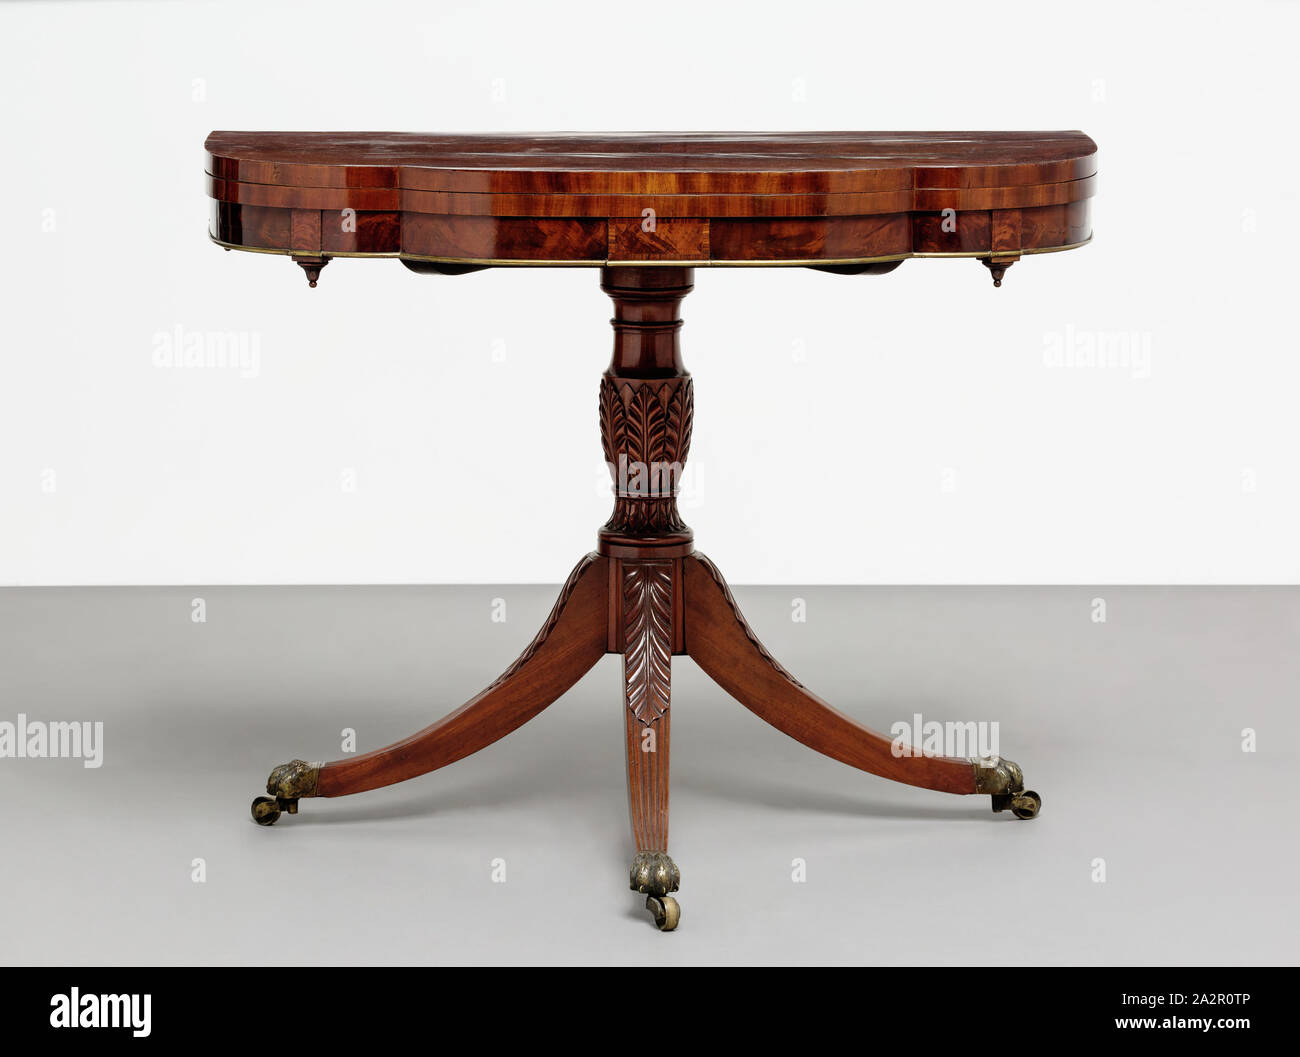 Unknown (American), Card Table, ca. 1805, mahogany and brass, Overall (open): 28 3/4 inches × 36 inches × 35 3/4 inches (73 × 91.4 × 90.8 cm Stock Photo